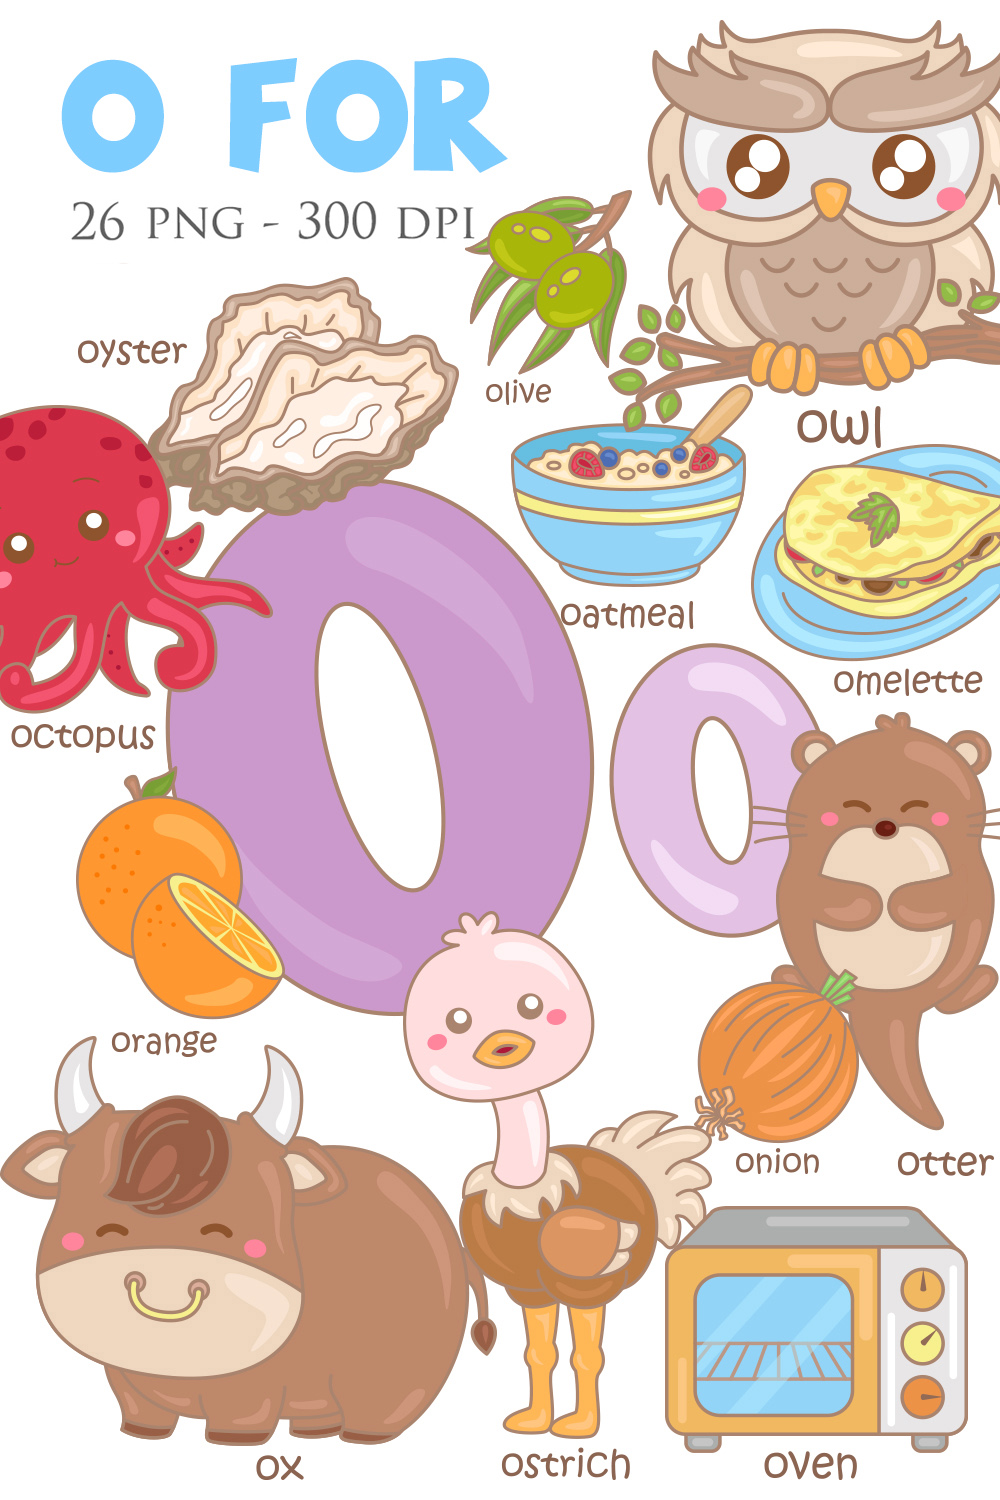 Alphabet O For Vocabulary School Letter Reading Writing Font Study Learning Student Toodler Kids Cartoon Orange Octopus Owl Oven Ox Olive Otter Oyster Onion Oatmeal Ostrich Omelette Illustration Vector Clipart pinterest preview image.